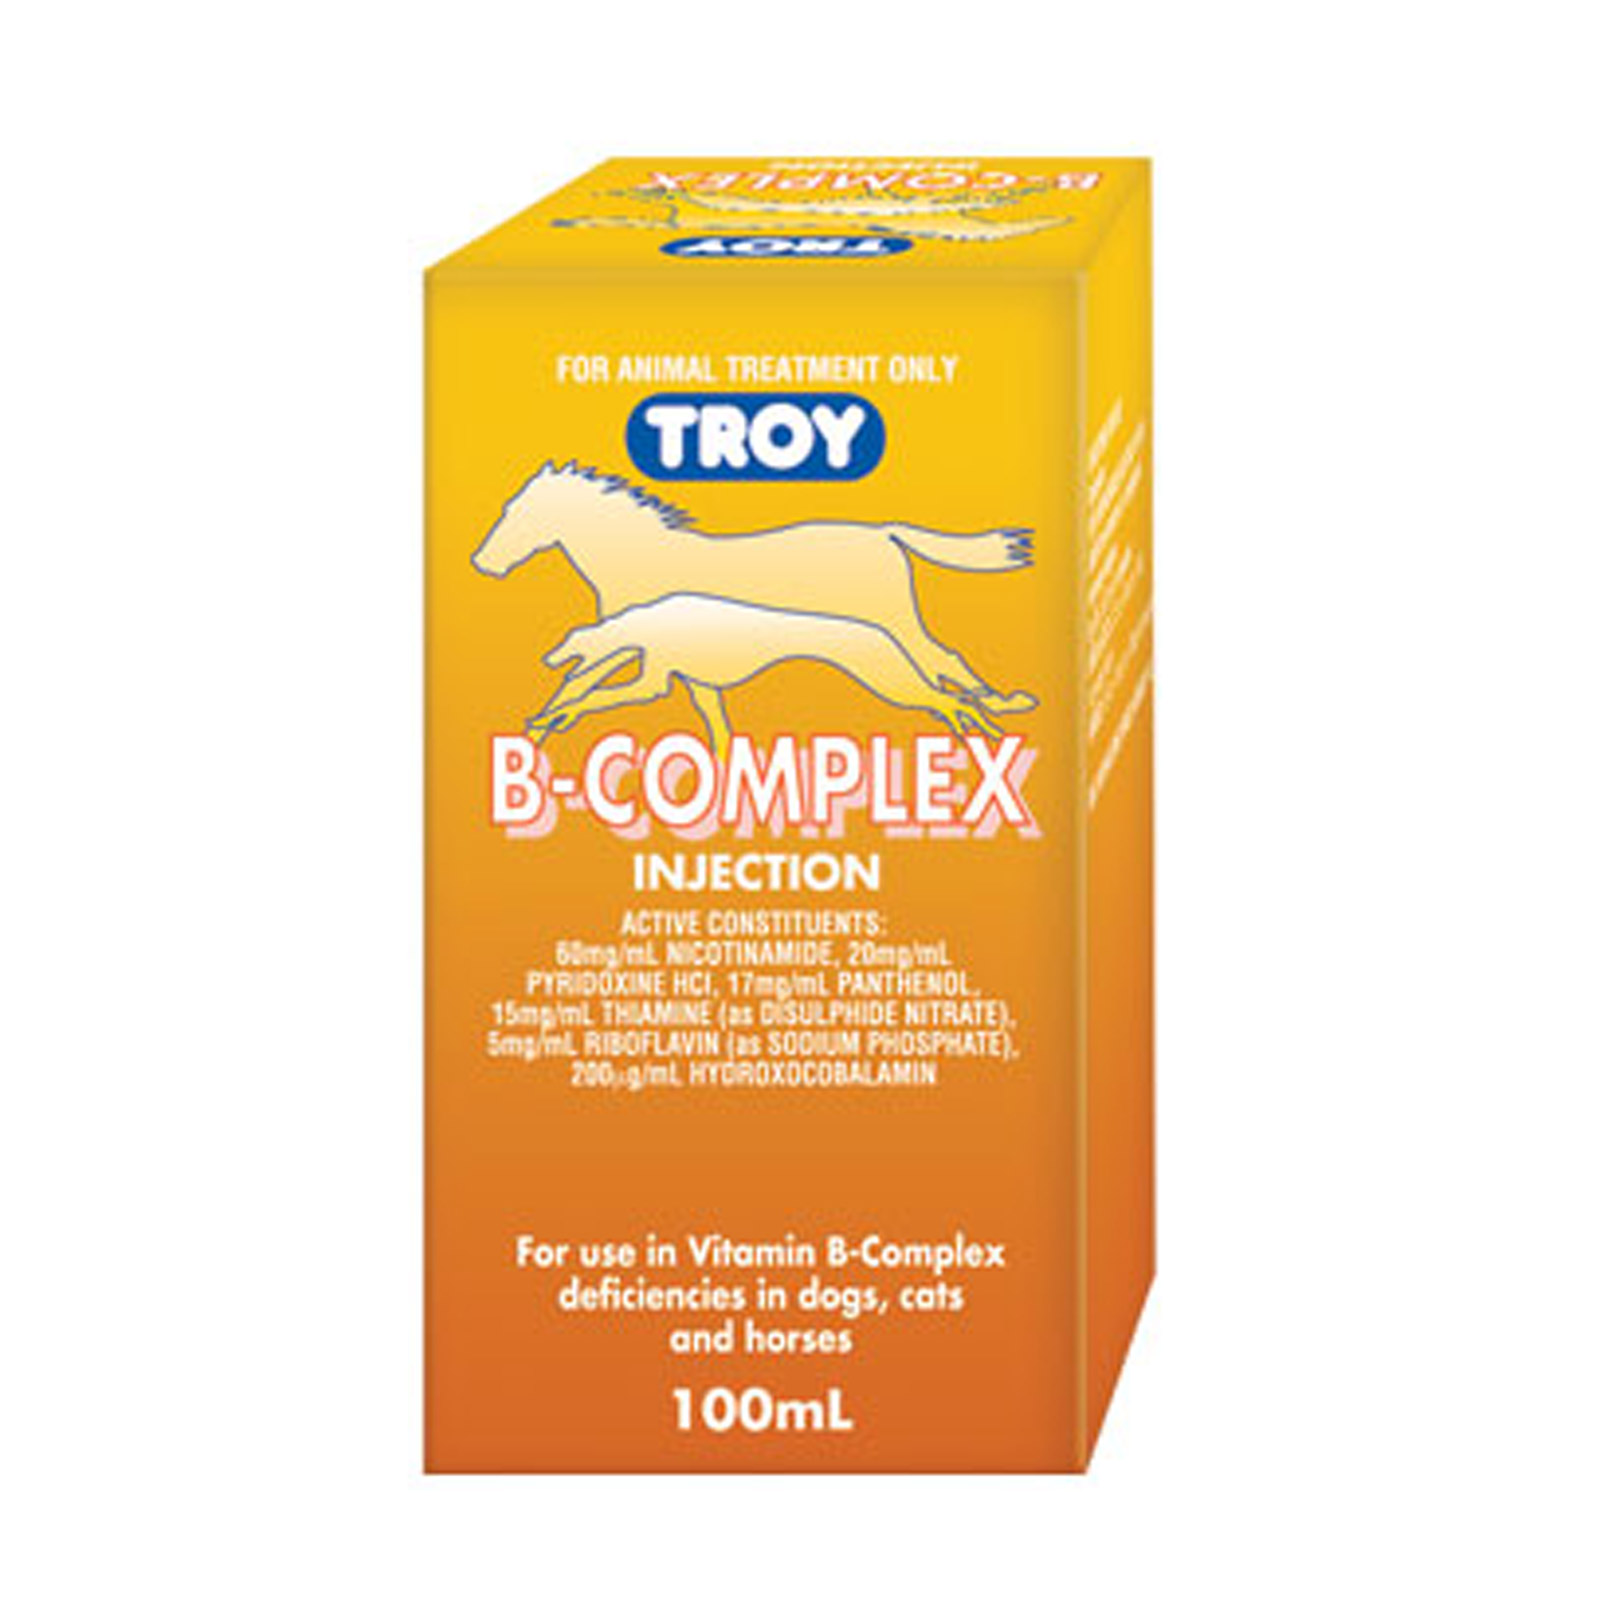 Troy B-Complex for Dogs